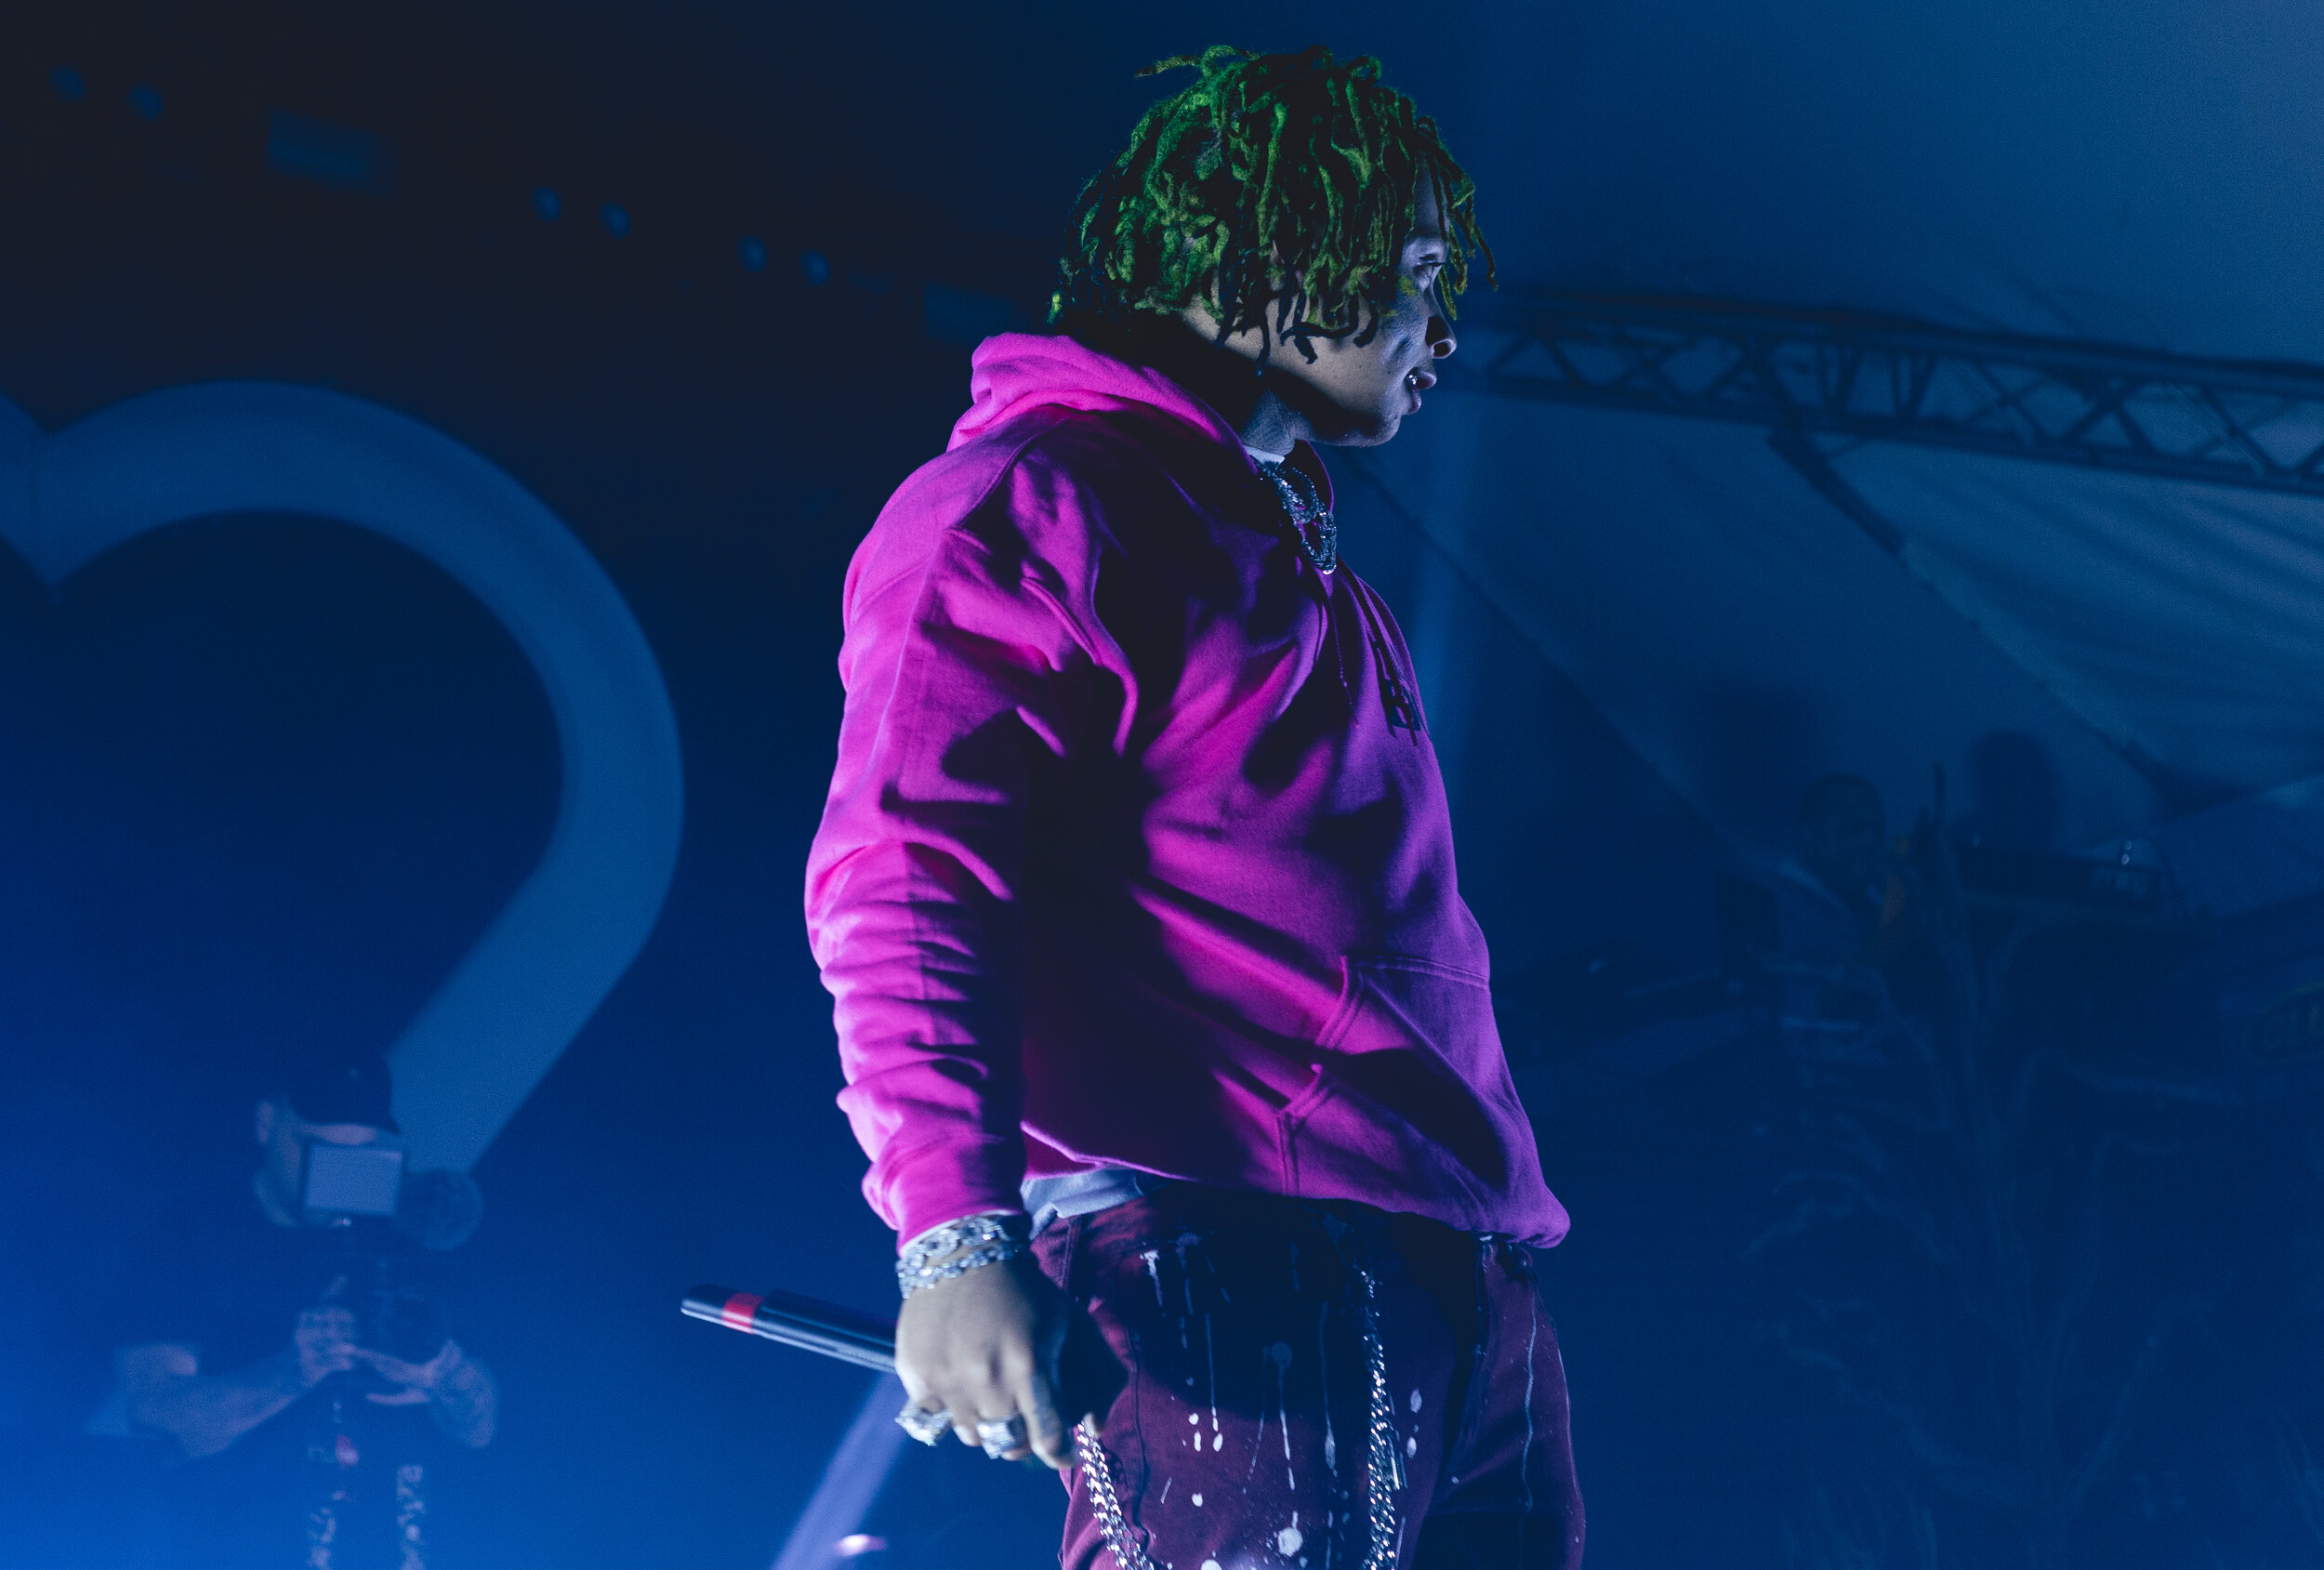  Trippie Redd takes the stage and hypes up the crowd. He is currently promoting his 4th mixtape entitled  A Love Letter to You 4,  and will head to Europe after his North American tour. 